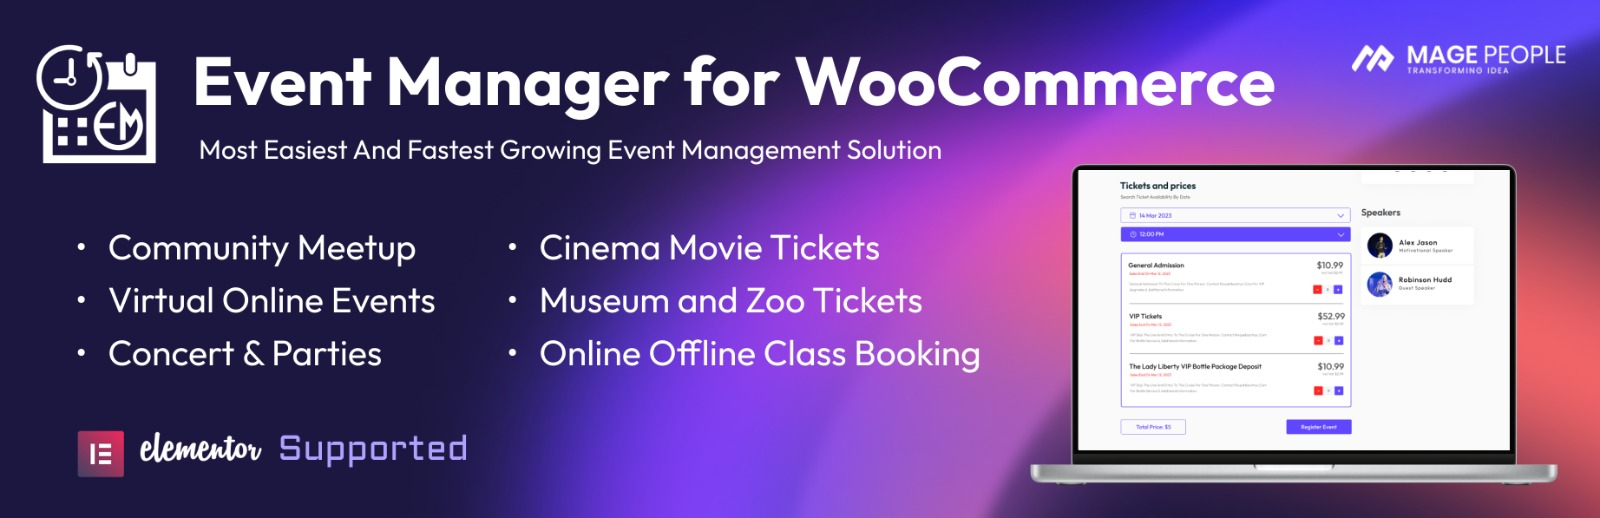 Event Manager and Tickets Selling Plugin for WooCommerce — WpEvently — WordPress Plugin